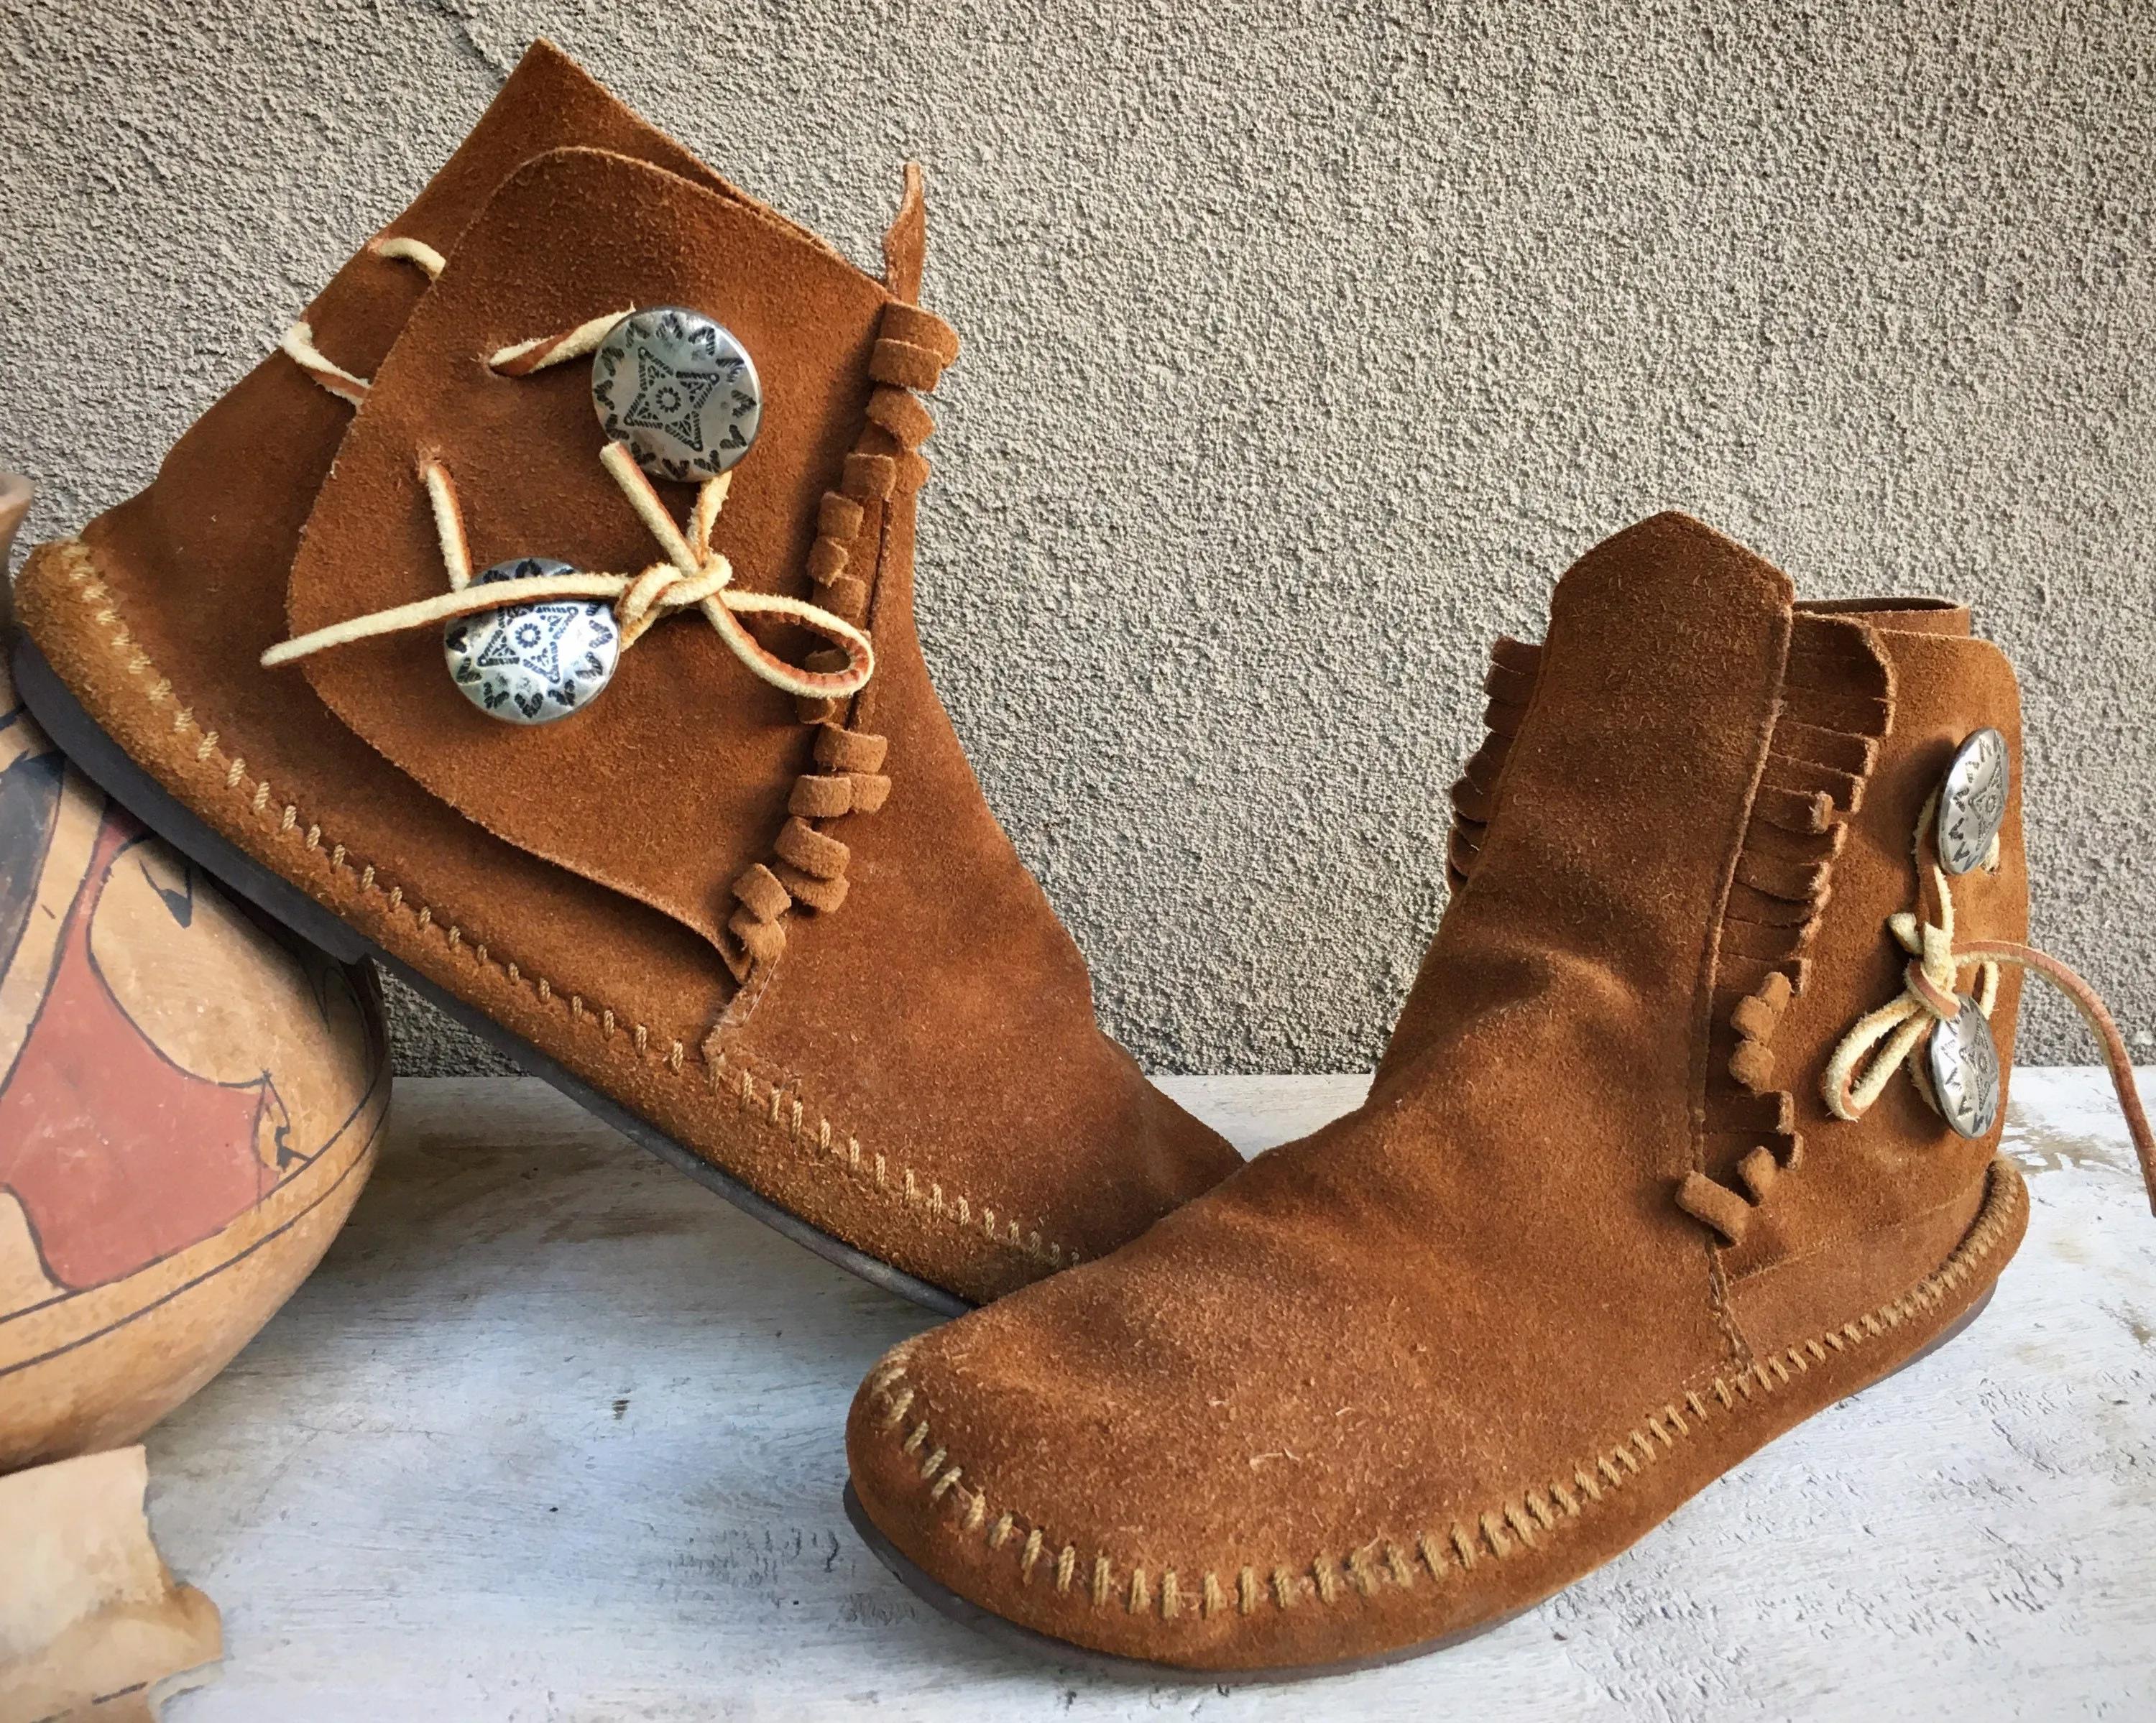 Vintage Minnetonka Moccasins for Women Brown Suede Soft Sole with ...